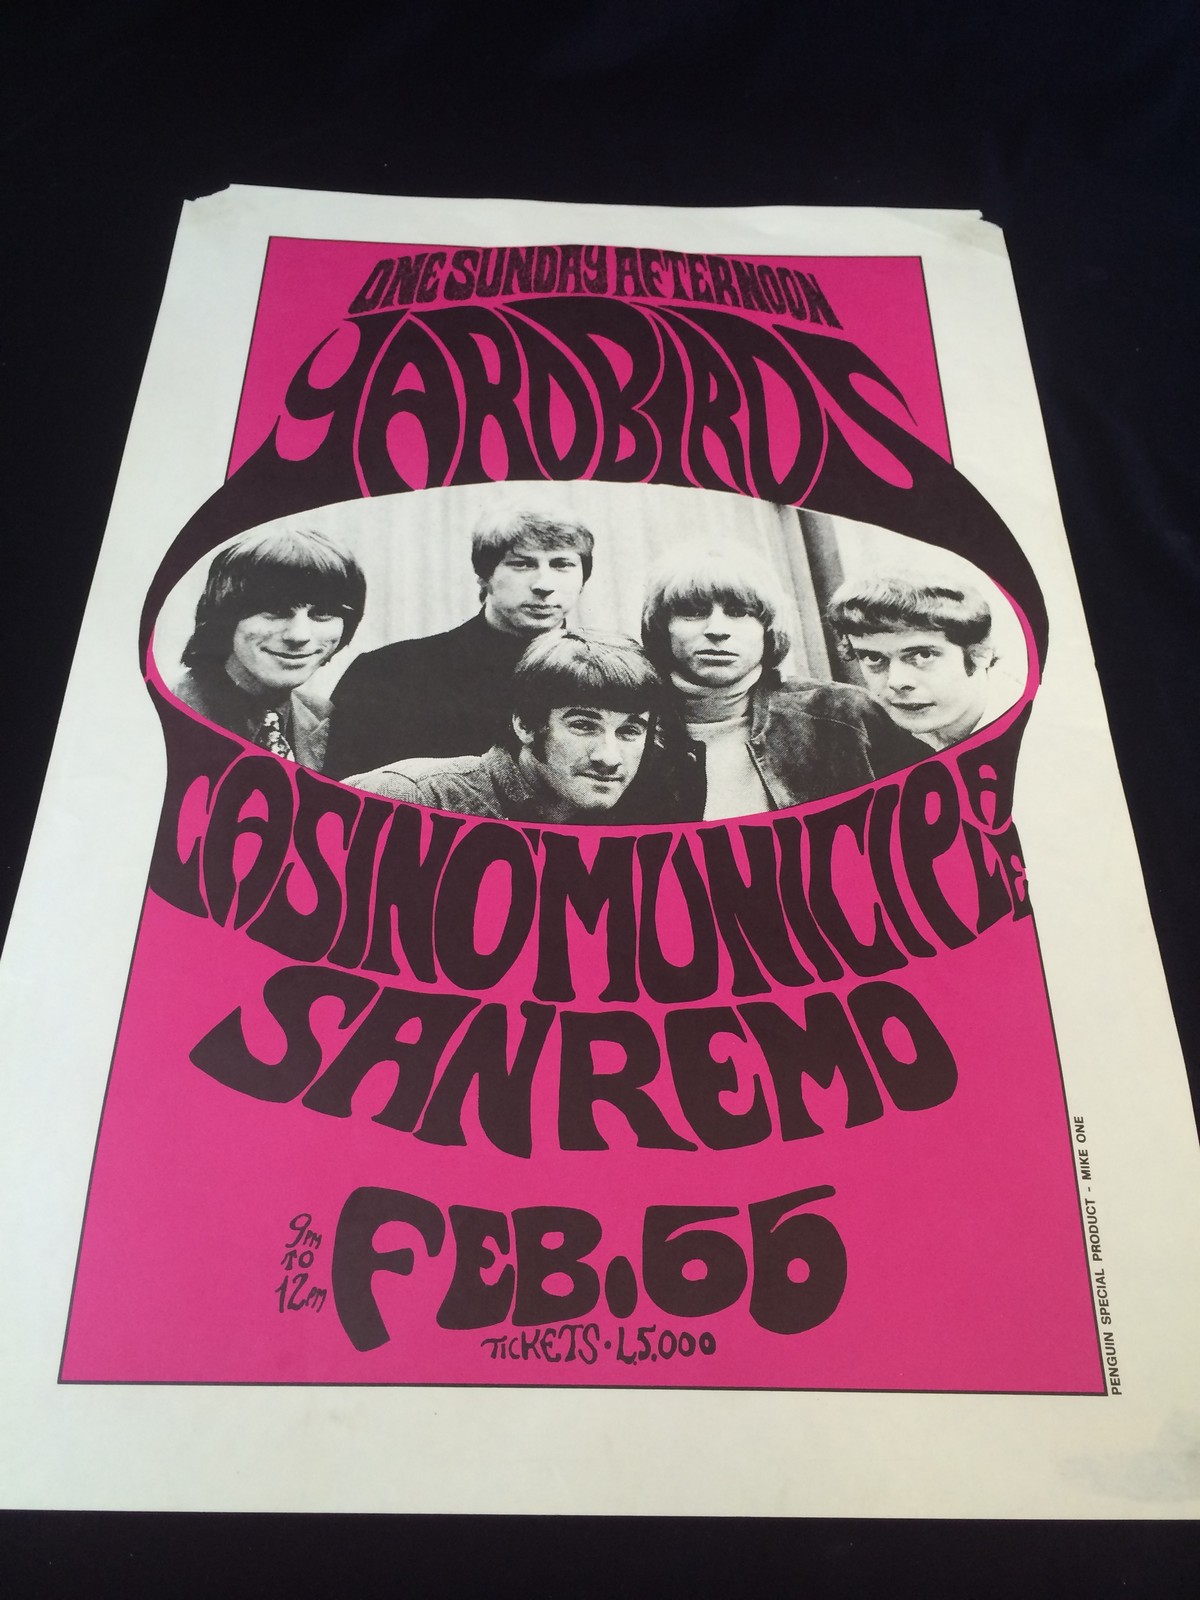 Original Yardbirds promotional poster 1966 from the One Sunday afternoon Tour